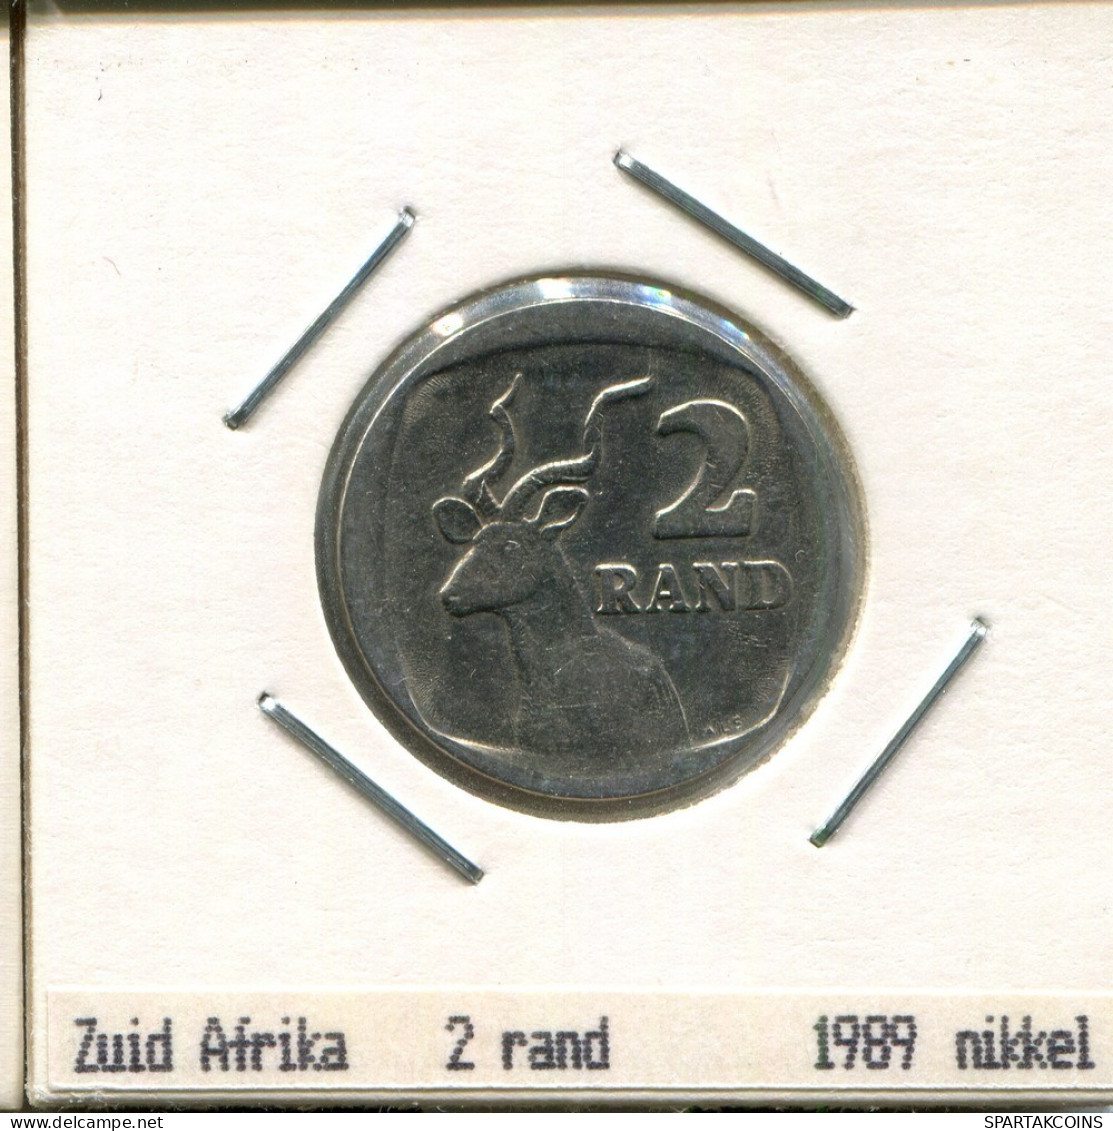 2 RAND 1989 SOUTH AFRICA Coin #AS289.U.A - Sud Africa